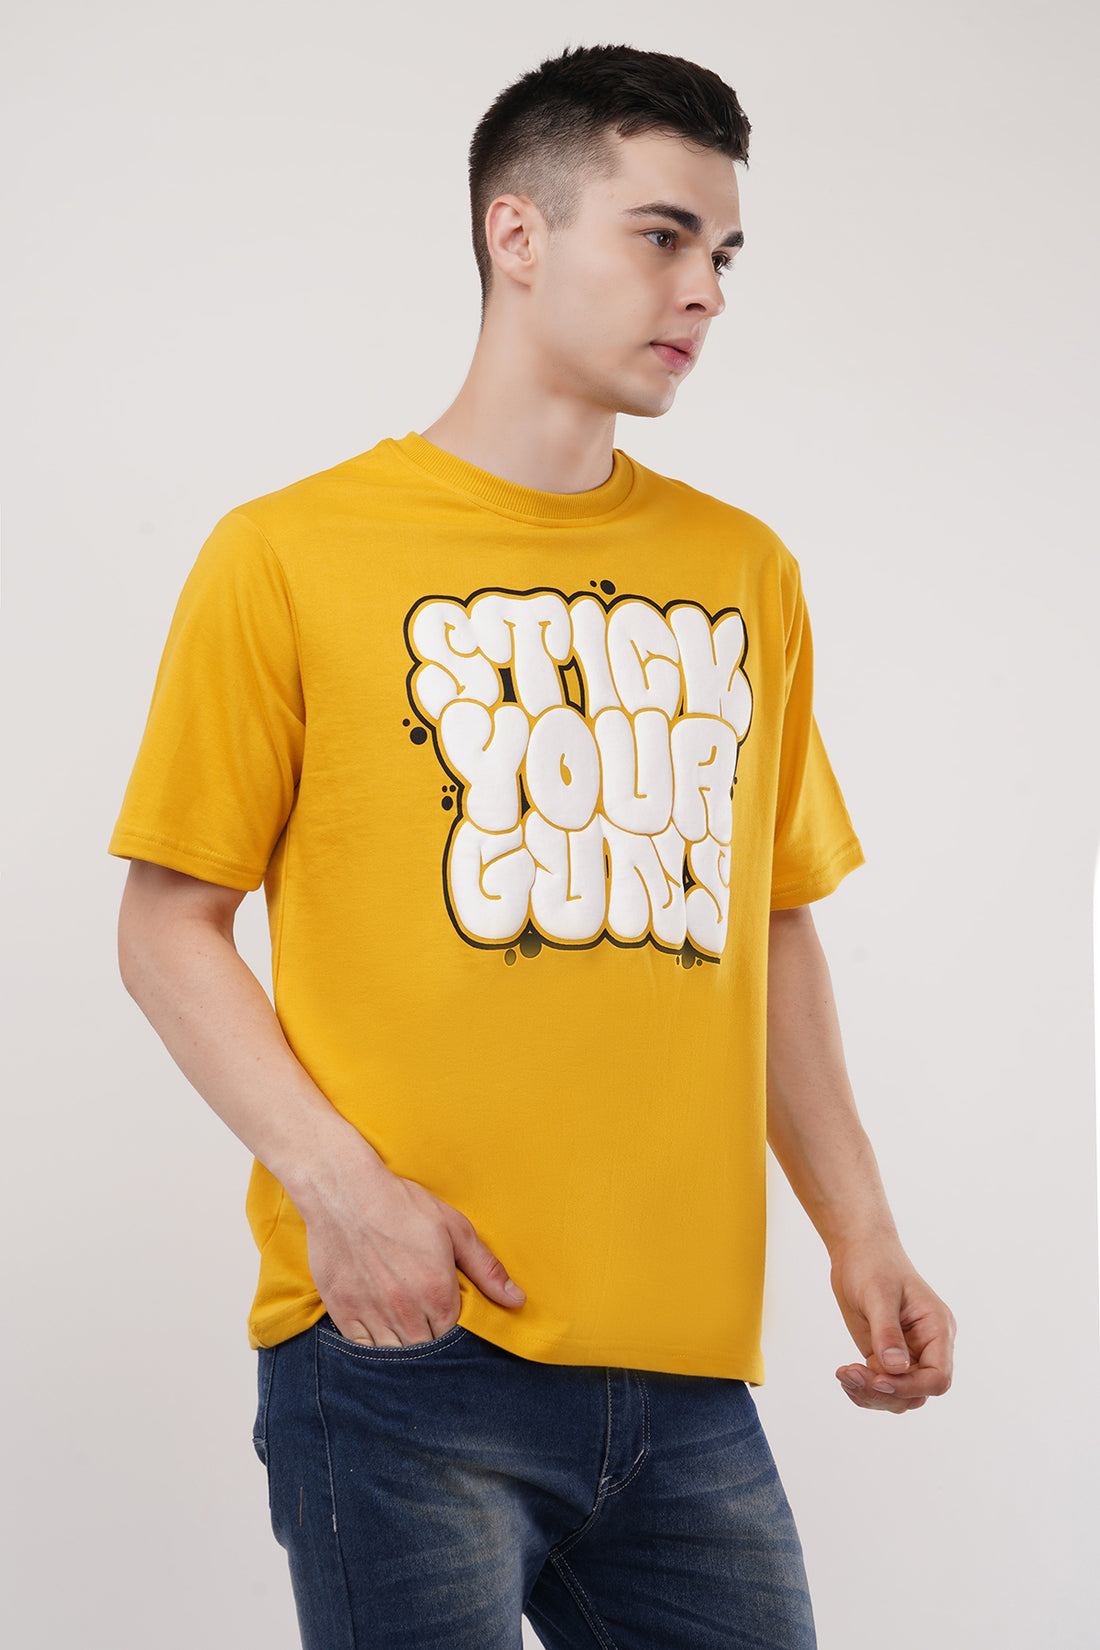 Stick Your Guns Roundneck Half Sleeve Obersized T-Shirt in Multiple Prints